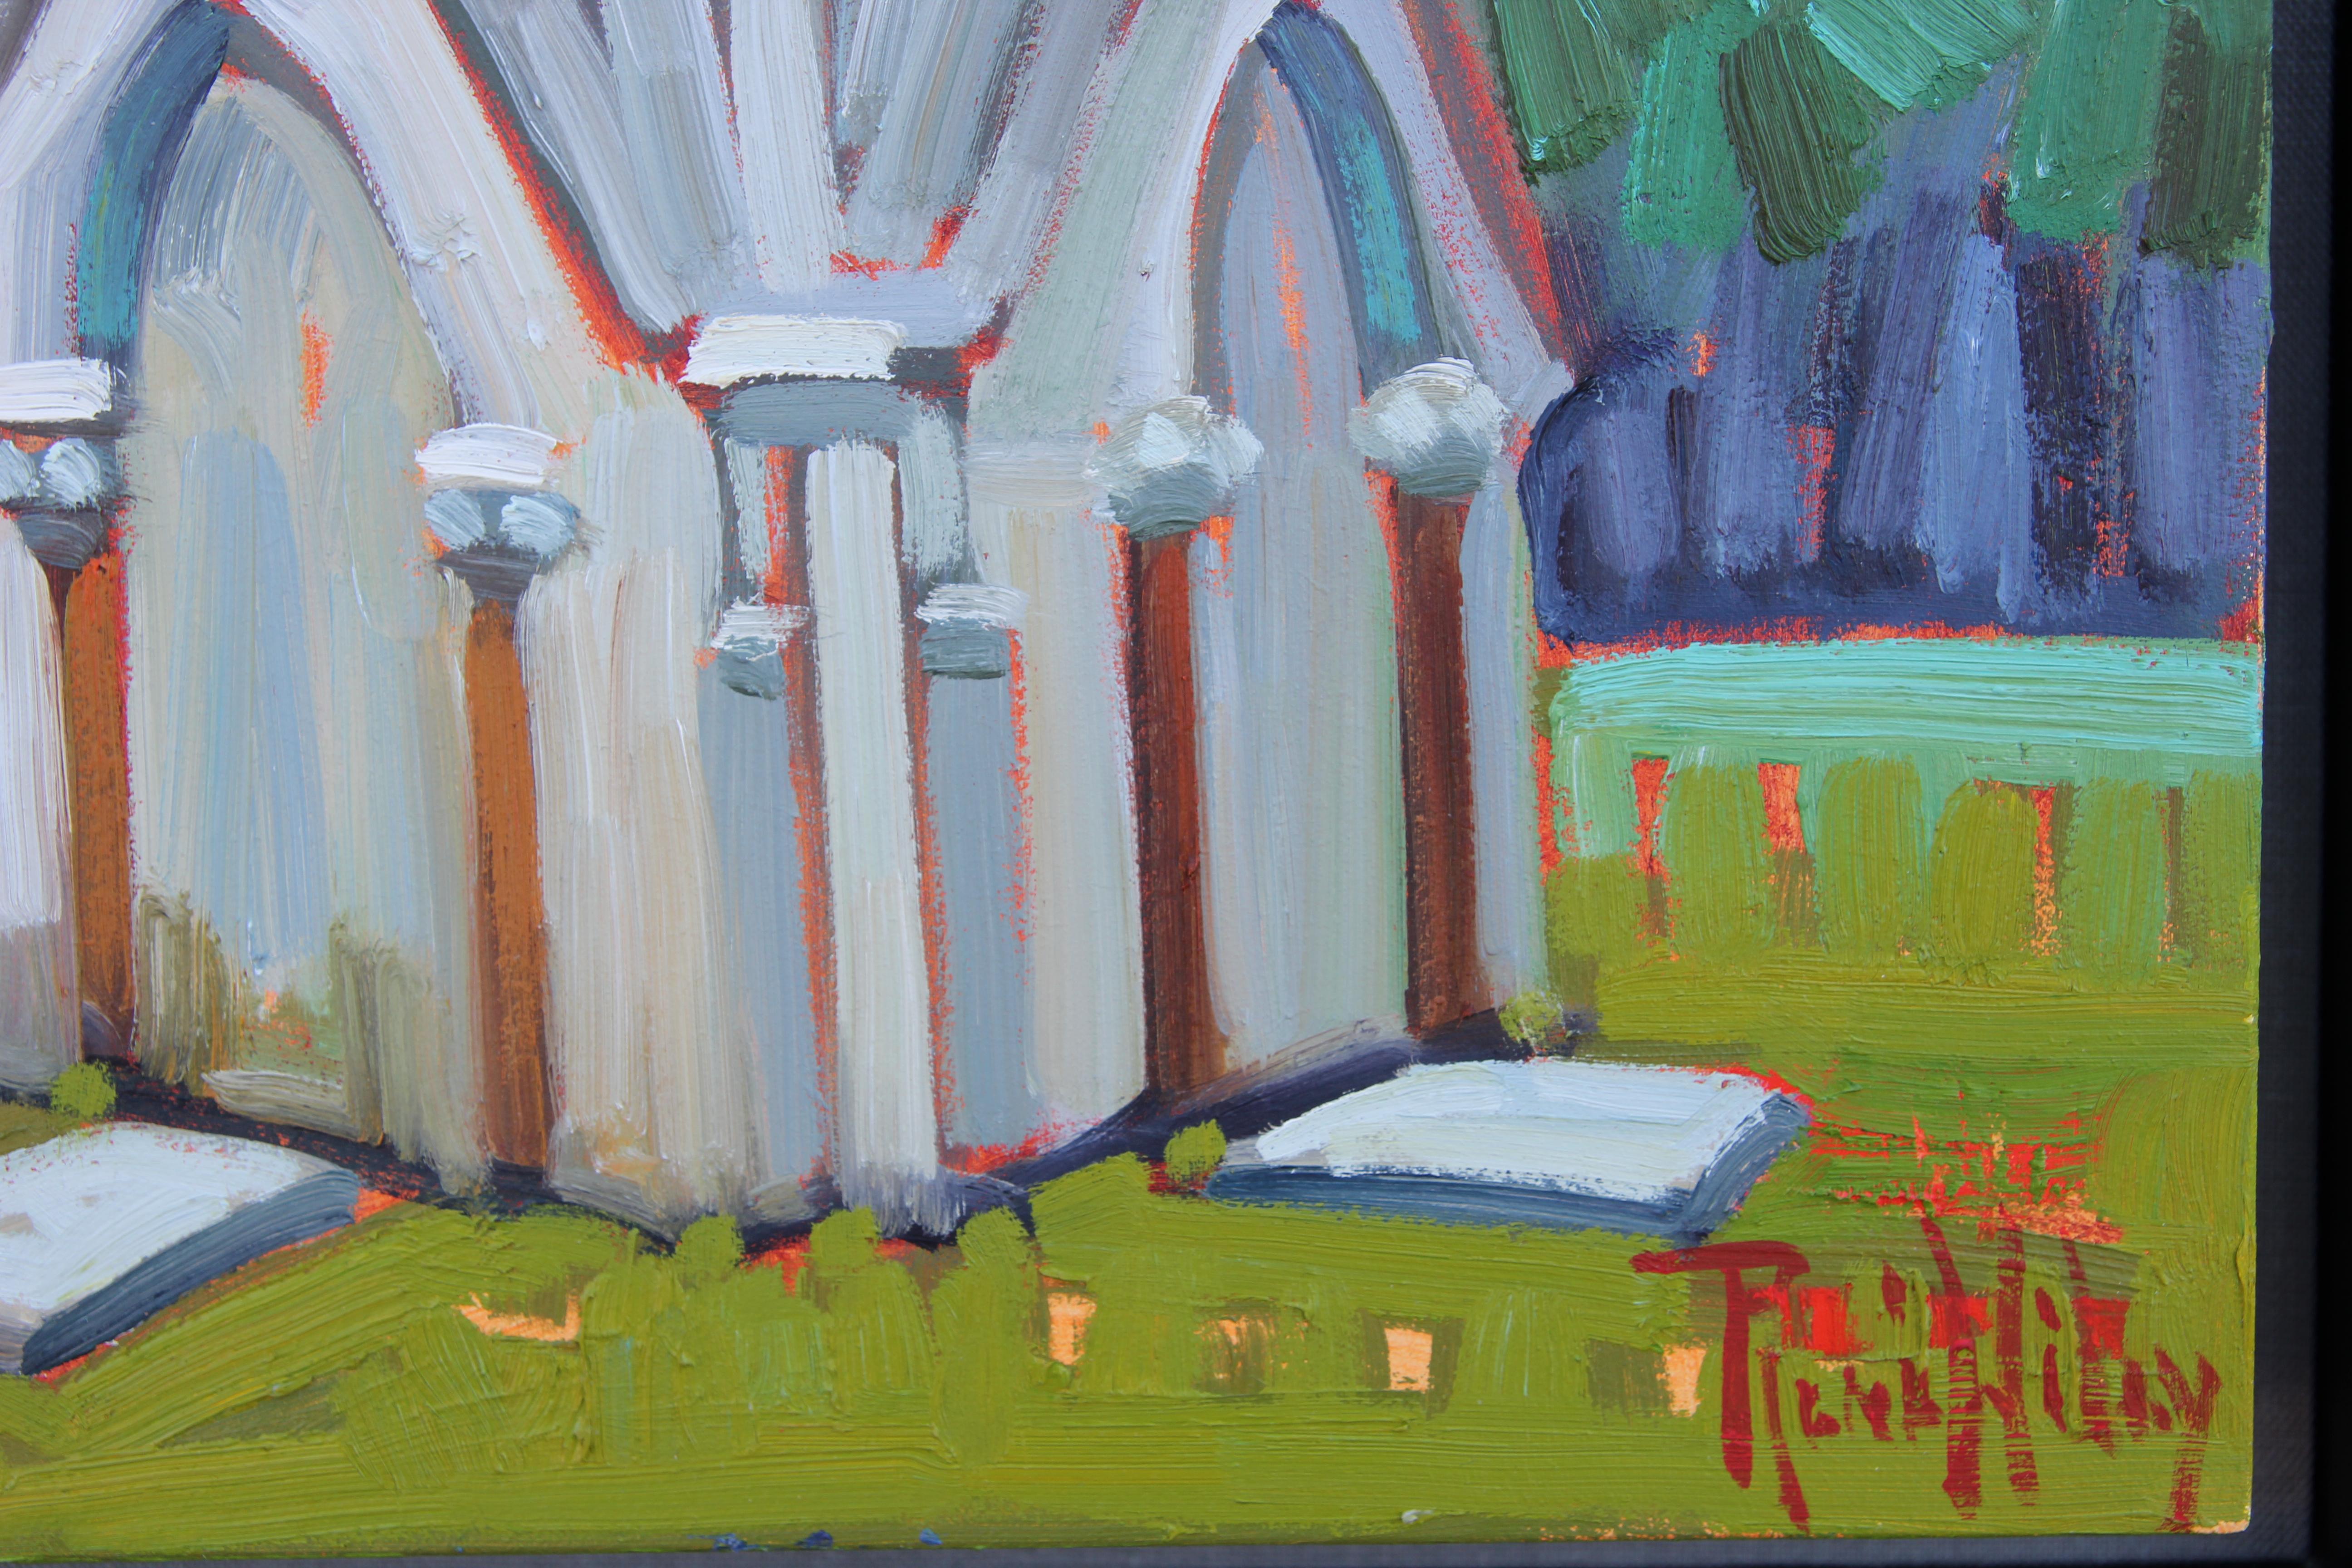 Idealized scene of Galveston's gravestones that are influenced by old European catholic graves. The painting is a triptych and is all framed in a black floating frame. The work is signed by the artist in the bottom right corner.
Dimensions without